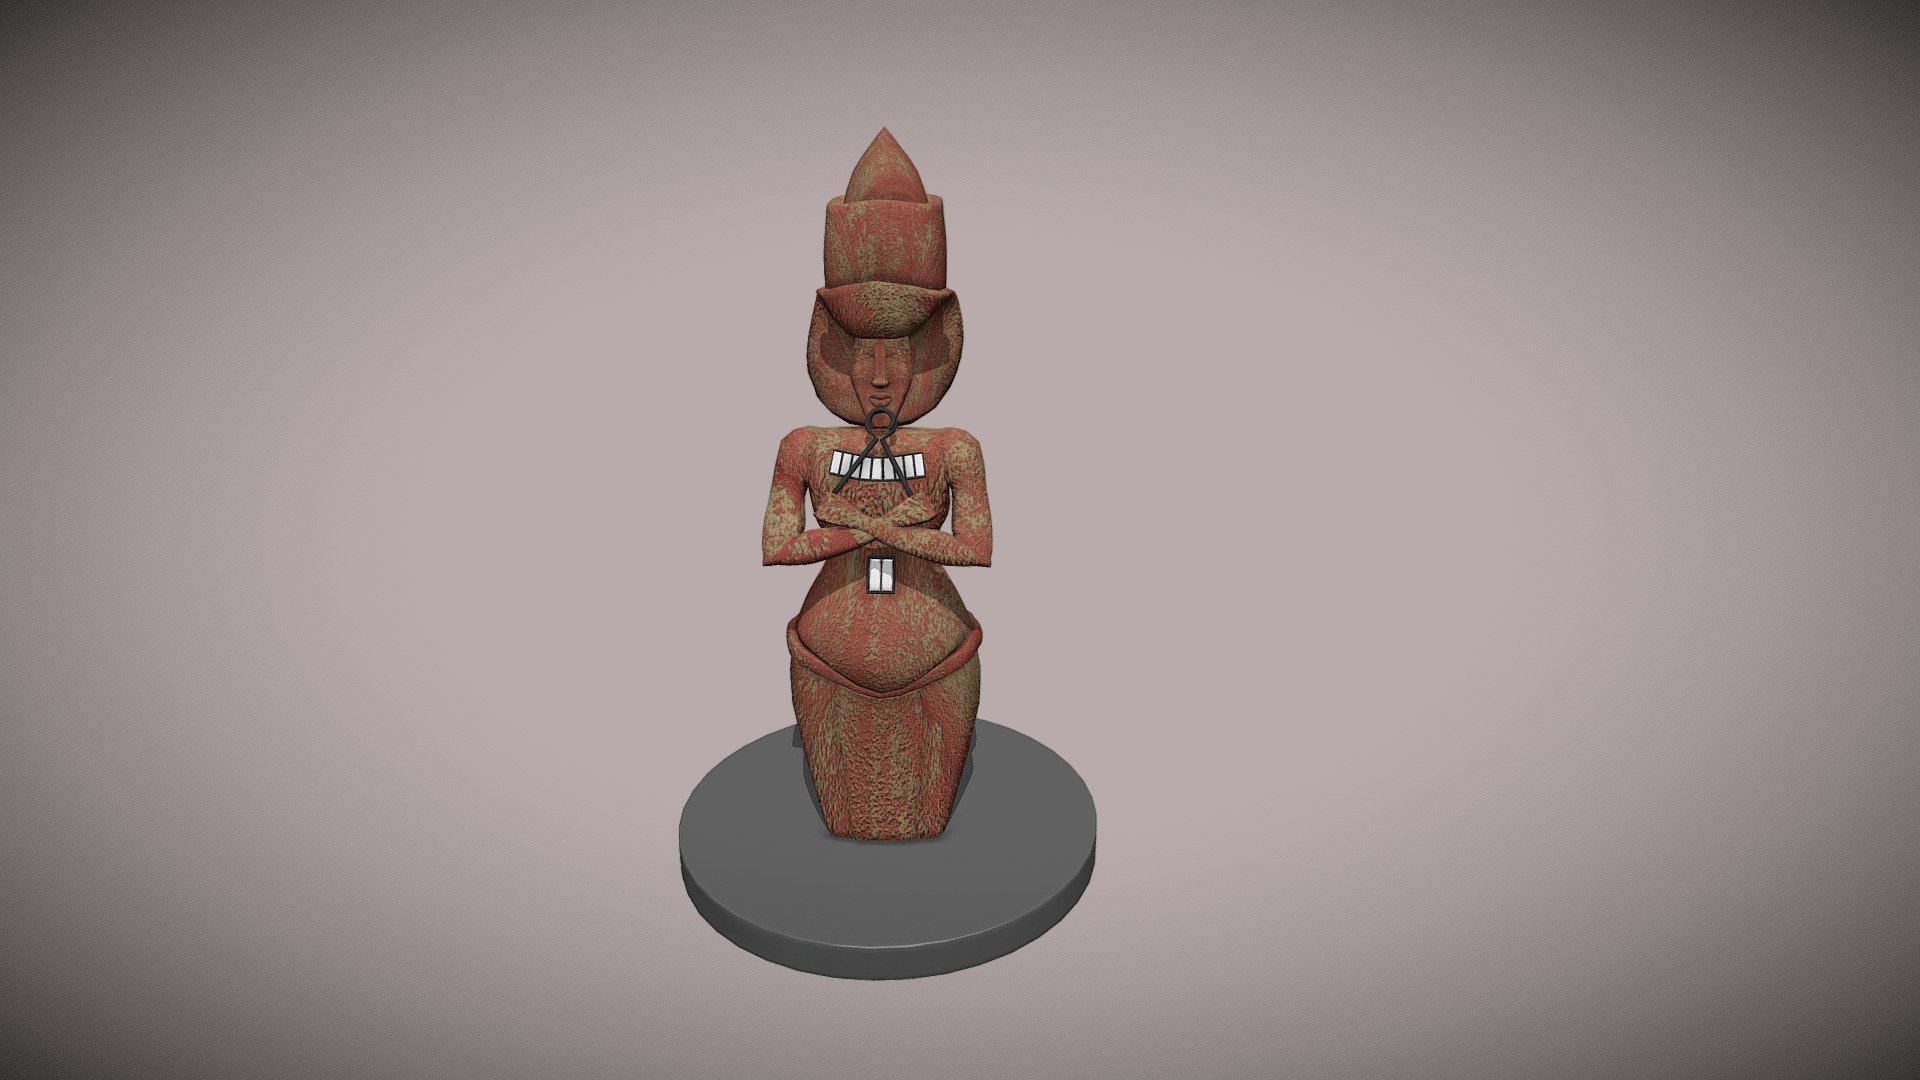 My submission for the anicent artifacts modeling challenge. My model is based of the Egyptian ruler, Akhenaten. First time modeling something close to a person 3d model